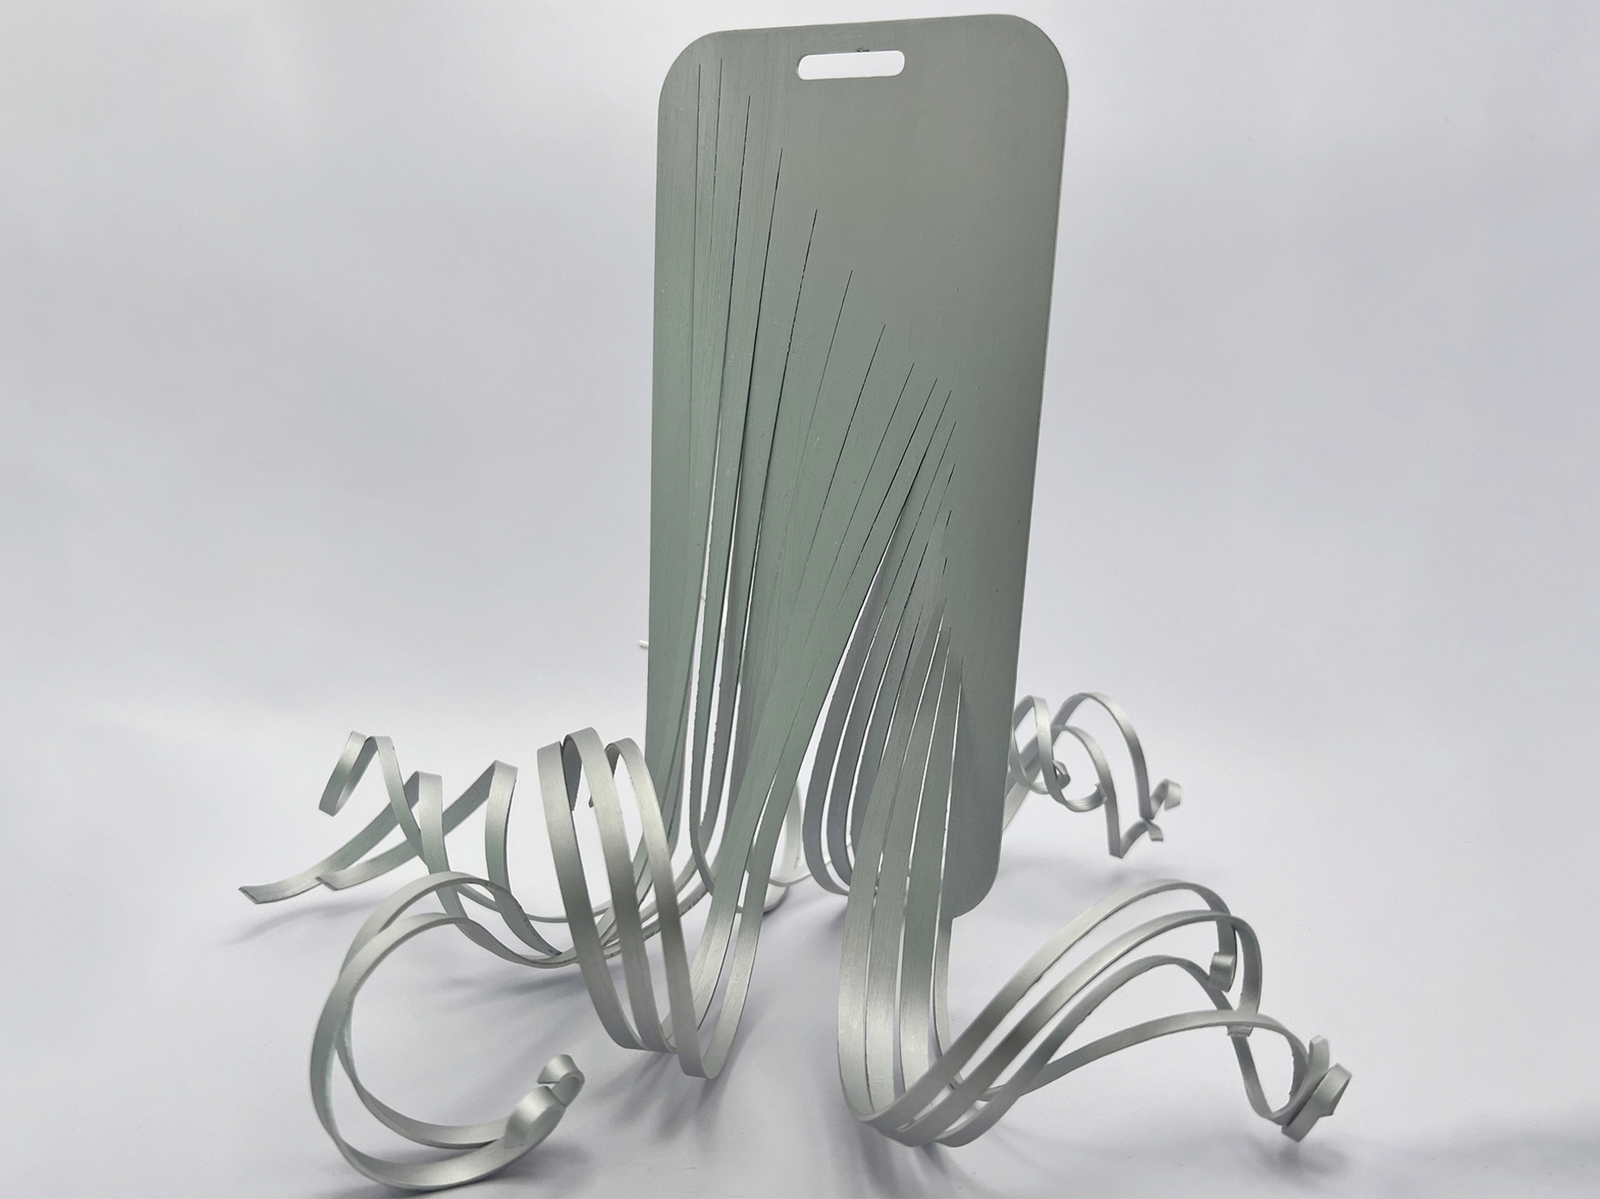 Smartphone shaped aluminium object which turns into a fluid, octopus-like shape.